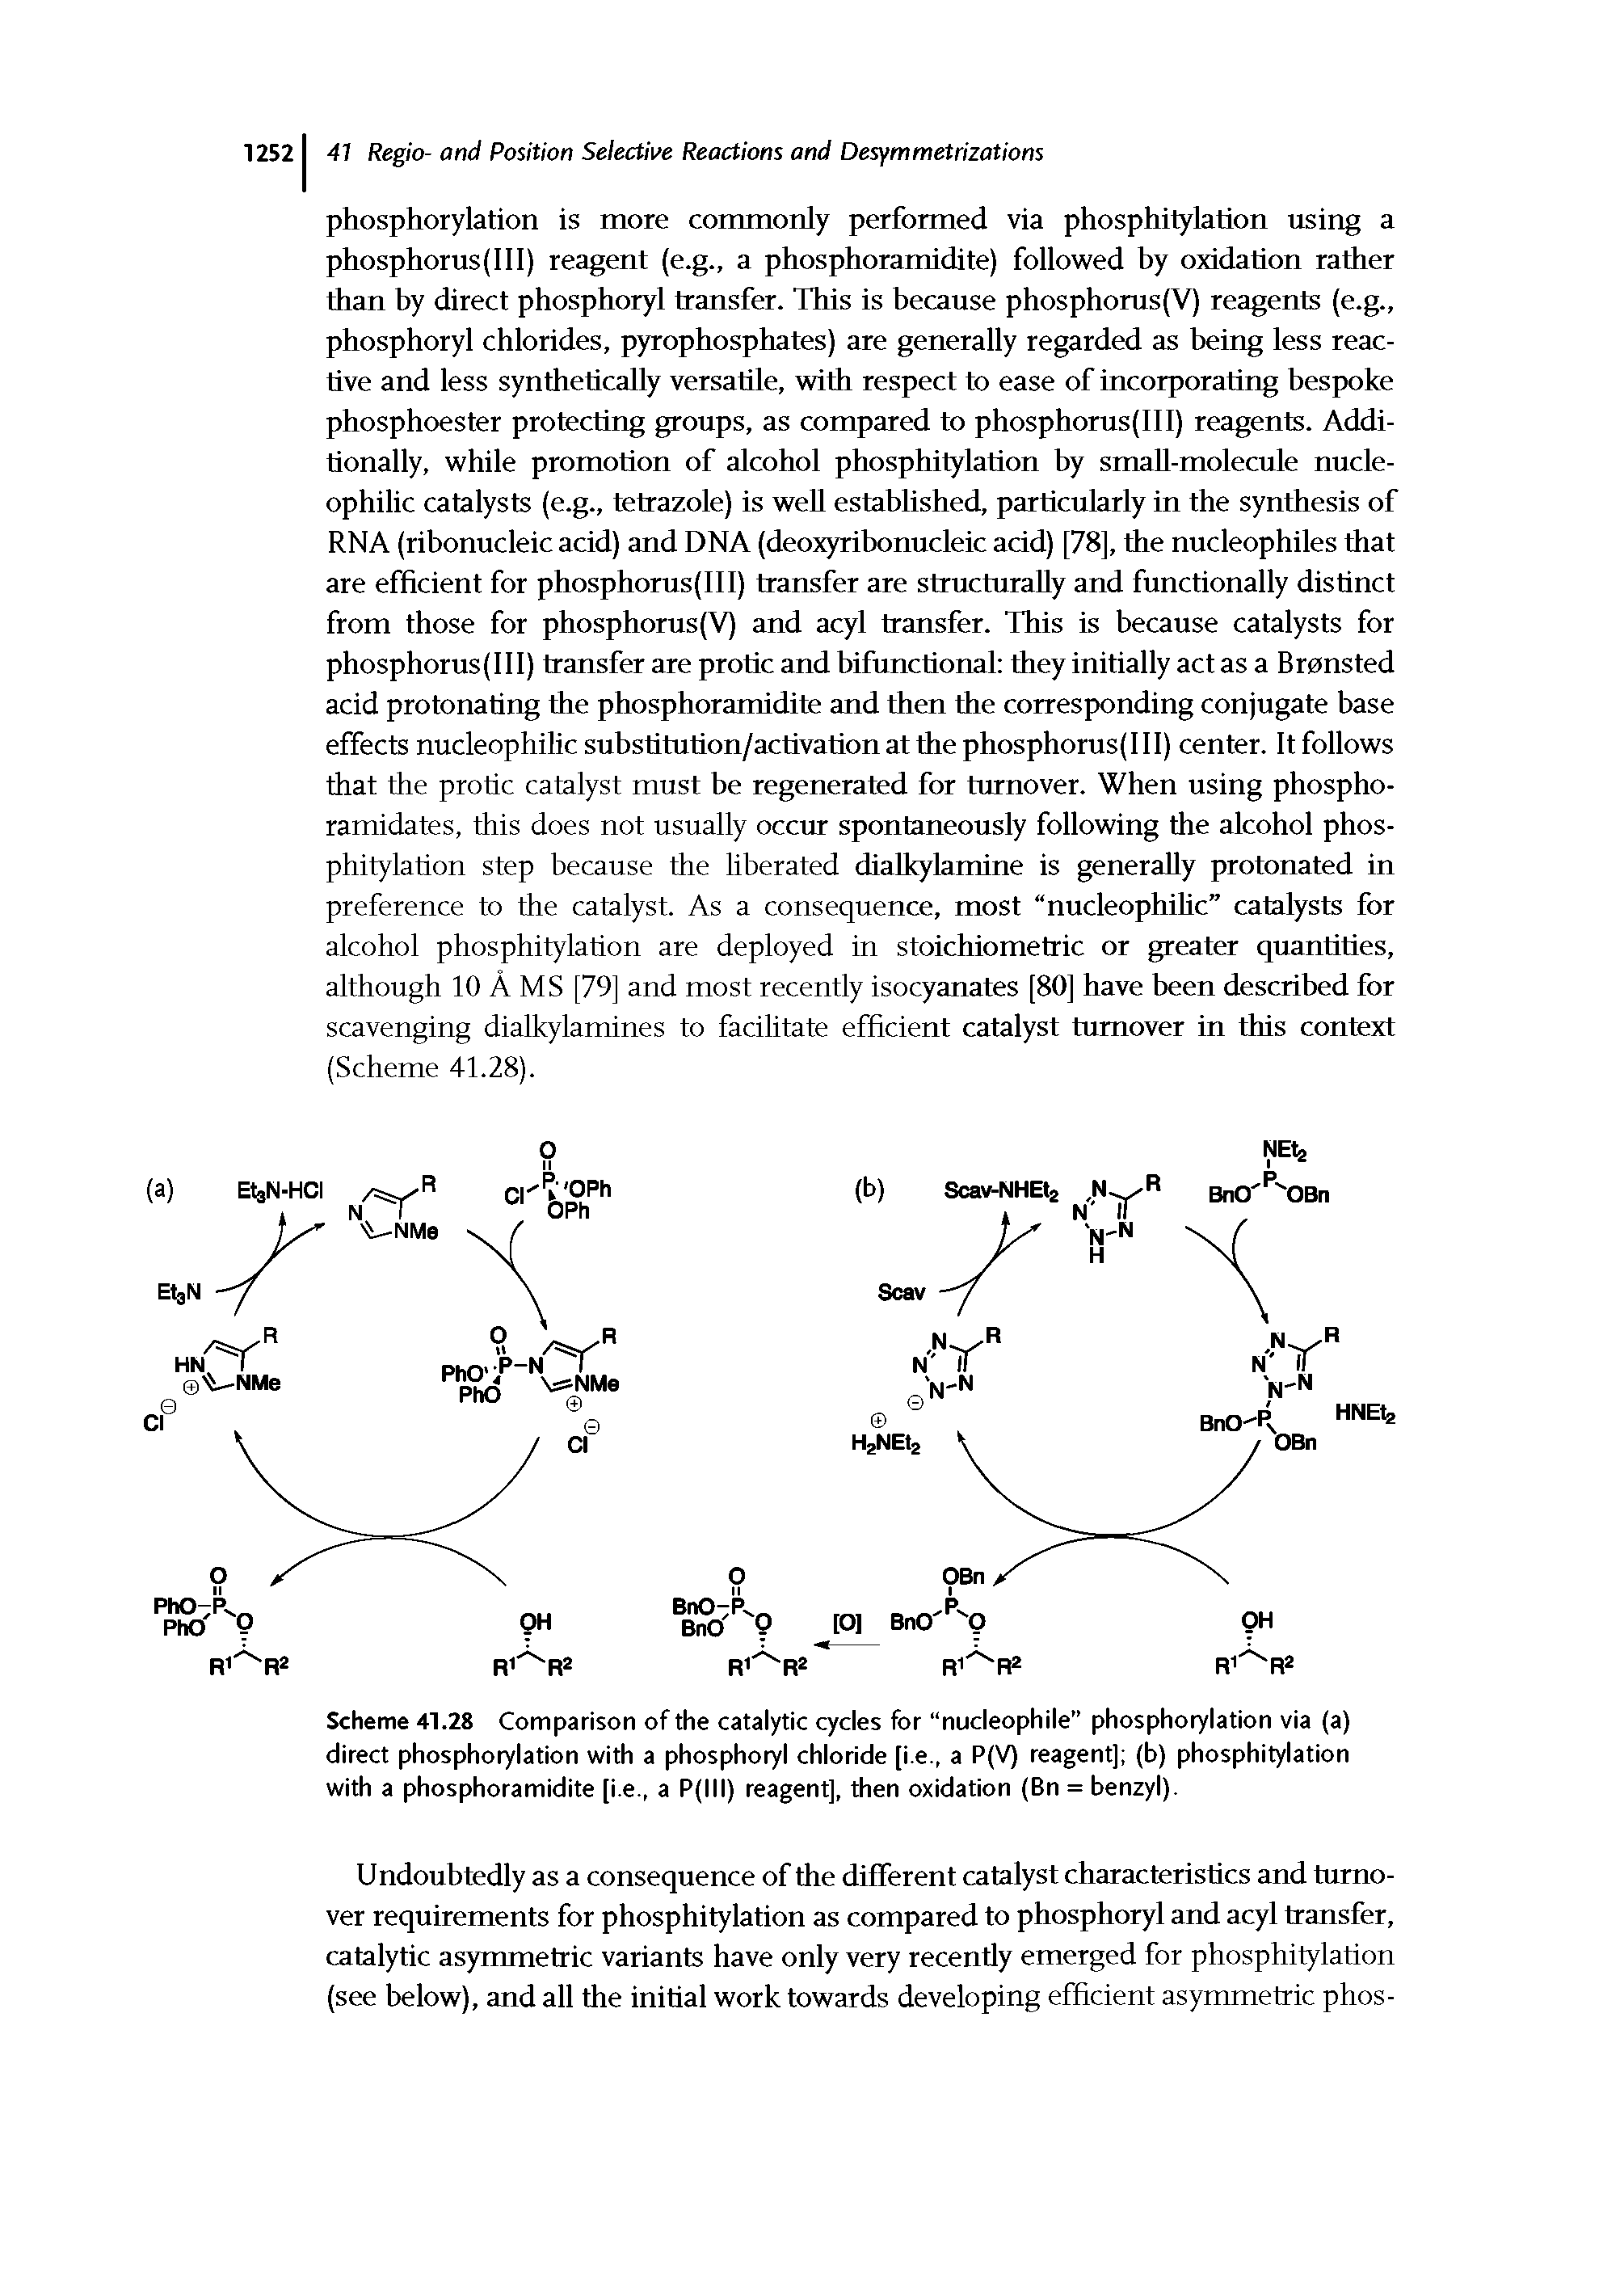 Scheme 41.28 Comparison of the catalytic cycles for nucleophile phosphorylation via (a) direct phosphorylation with a phosphoryl chloride [i.e., a P(V) reagent] (b) phosphitylation with a phosphoramidite [i.e., a P(lll) reagent], then oxidation (Bn = benzyl).